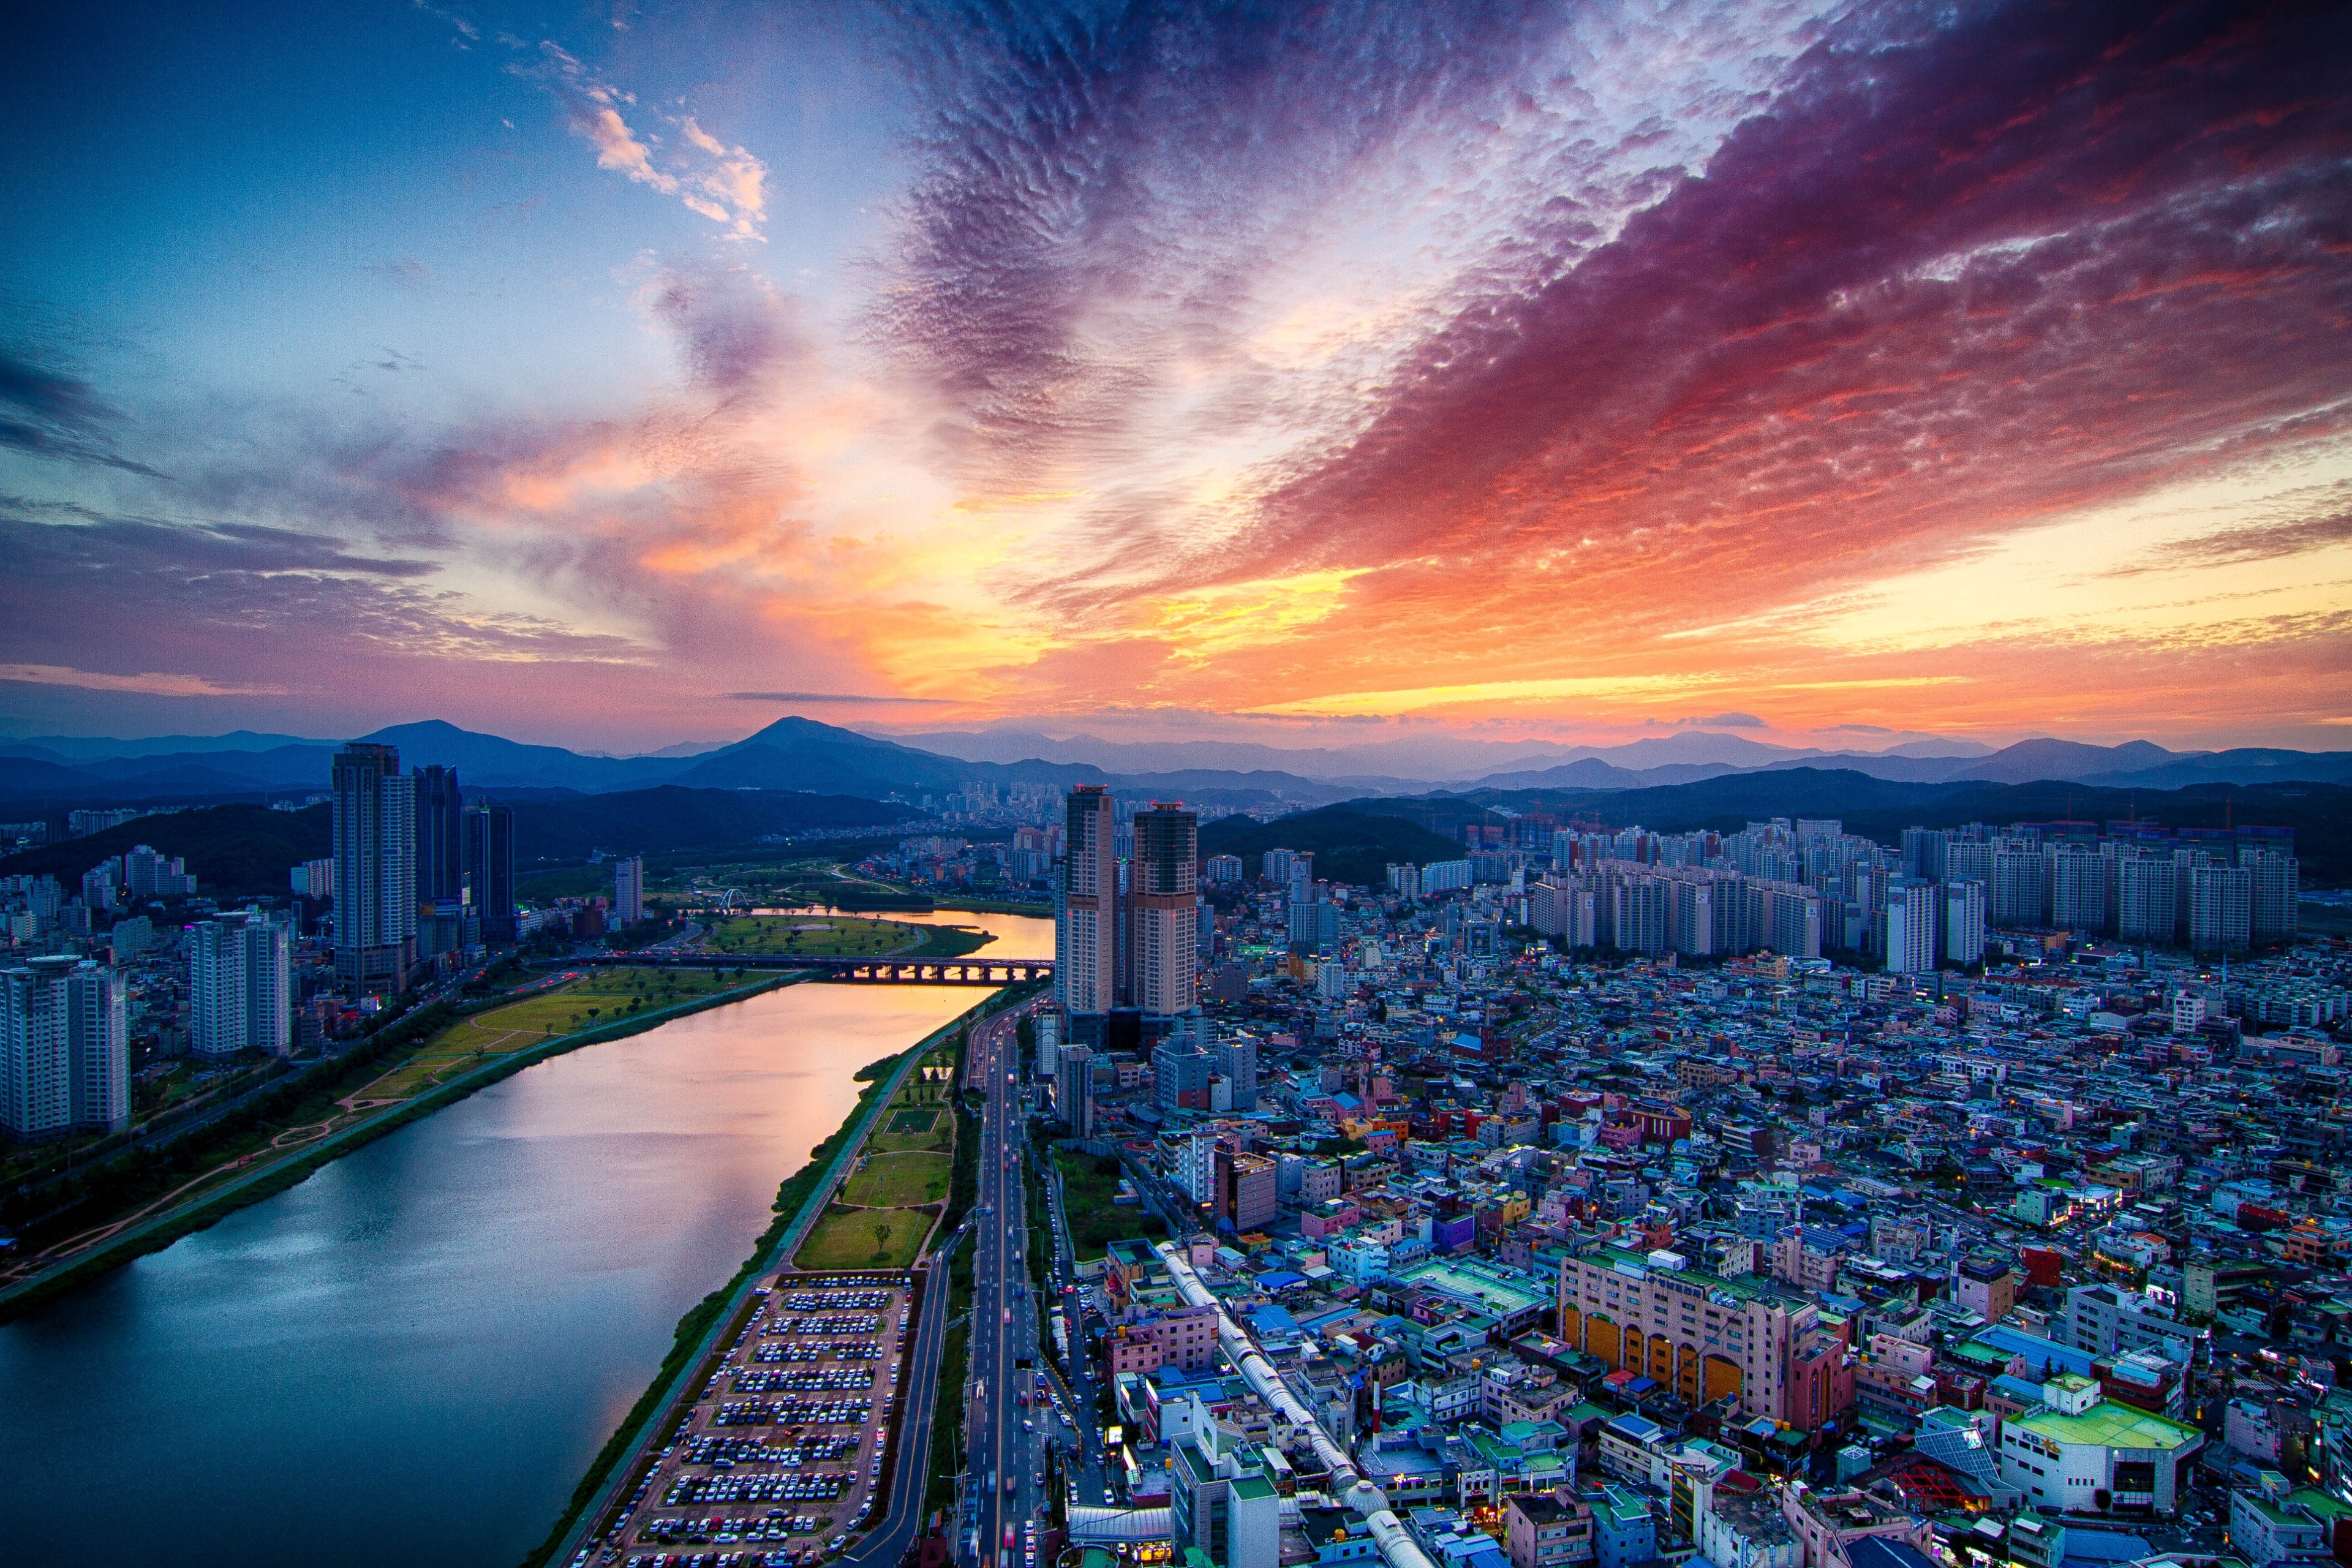 <h2>Top-rated places to stay near the beach in Ulsan</h2>